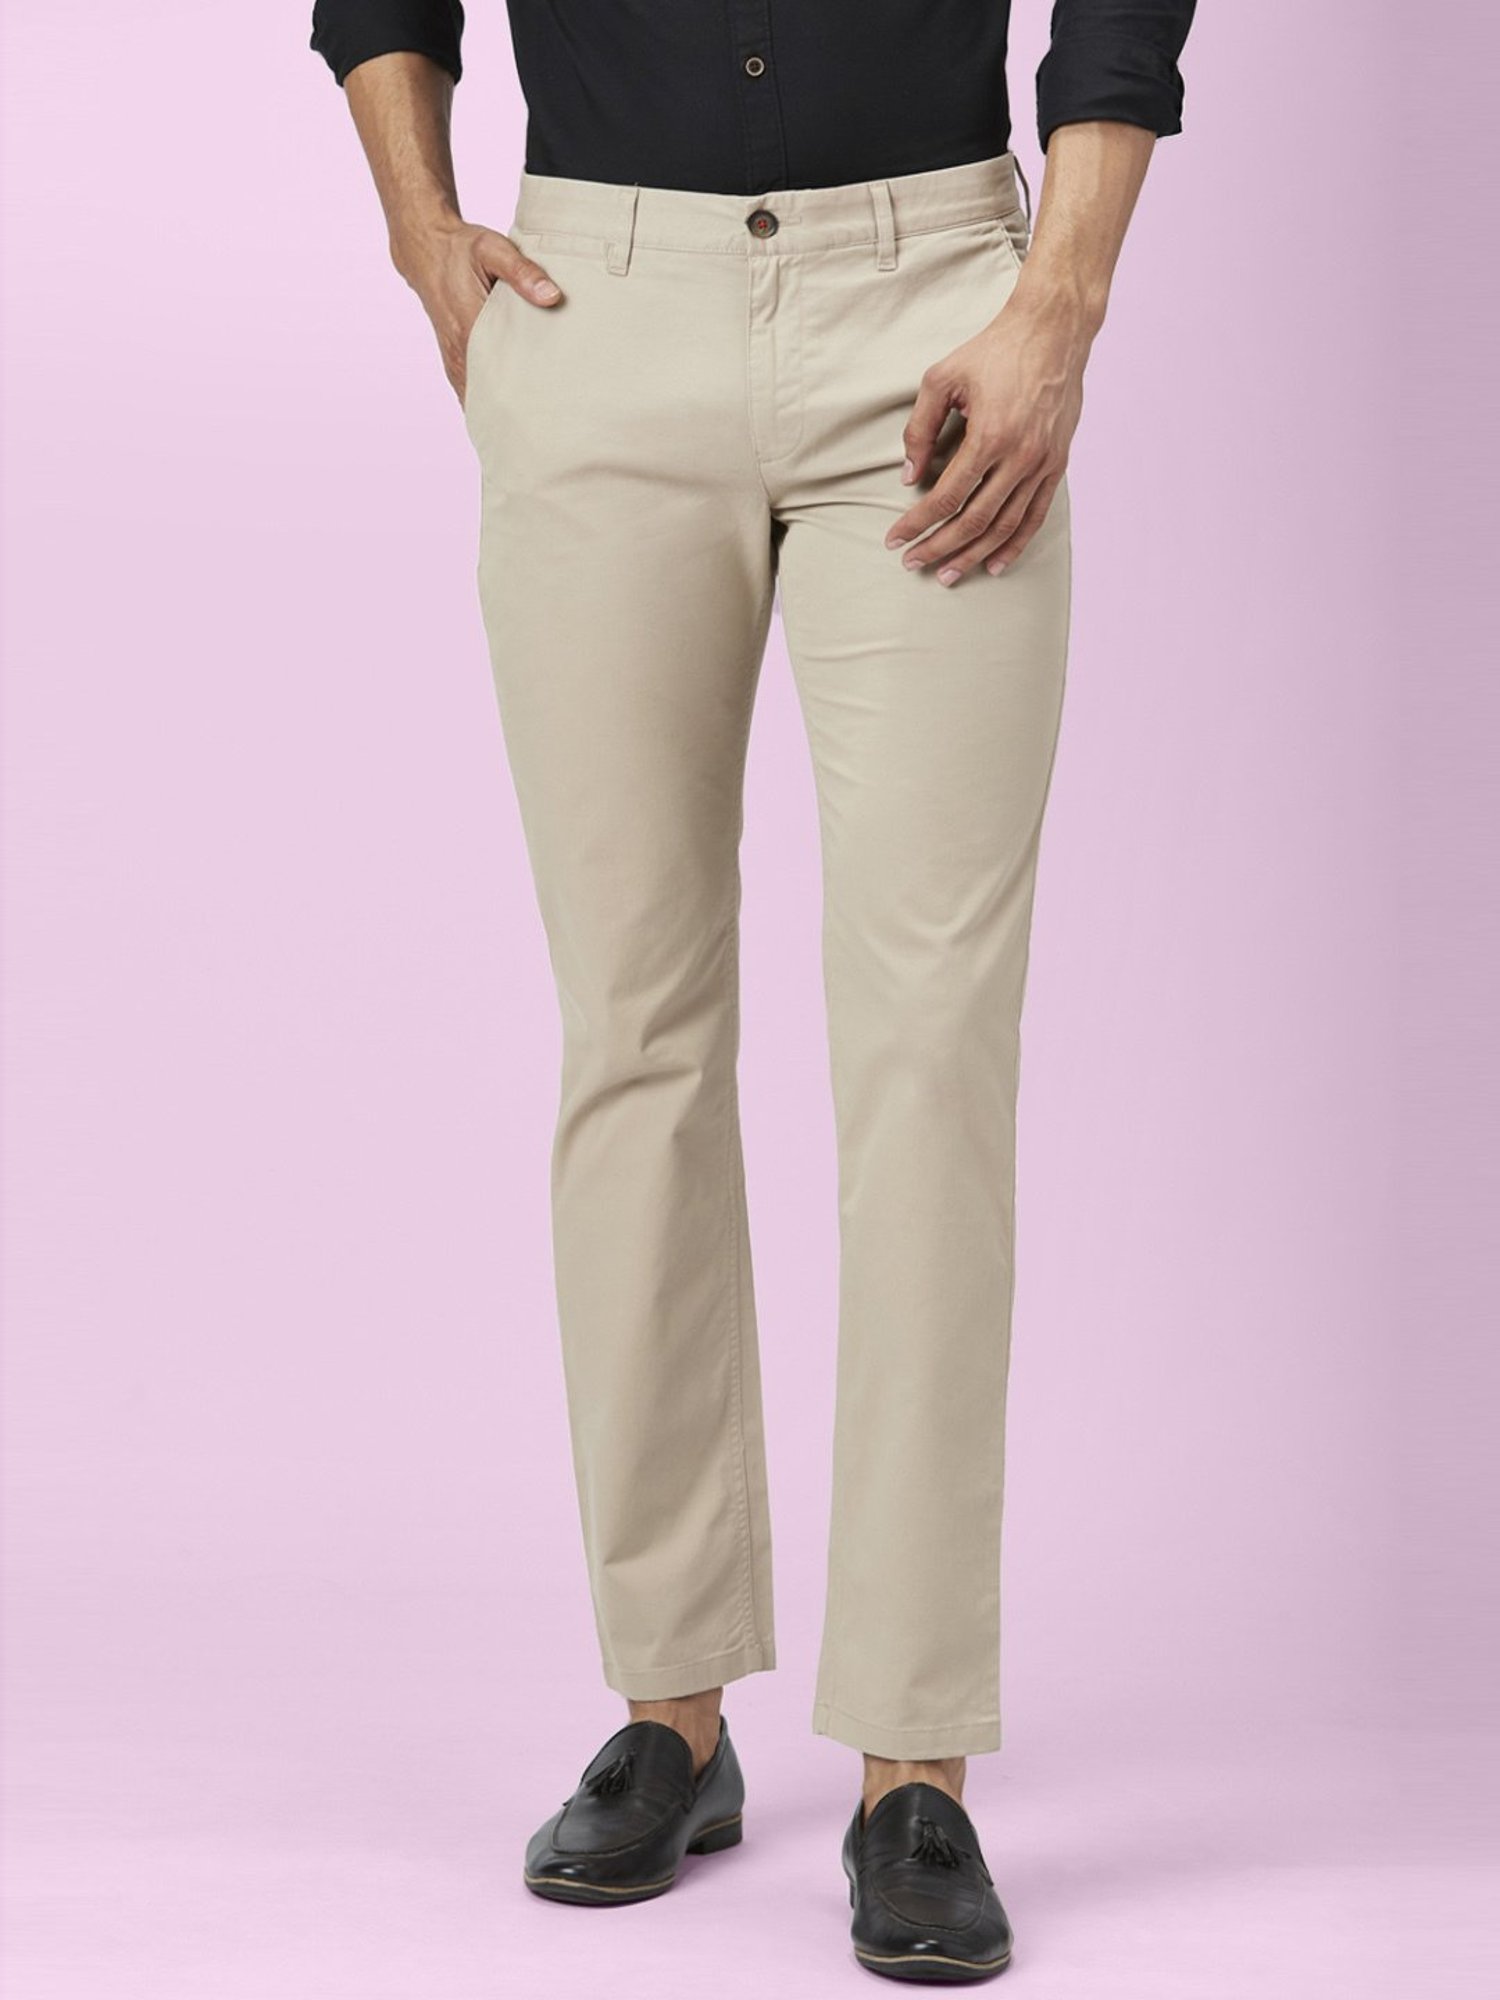 Buy BYFORD By Pantaloons Men Slim Fit Low Rise Cigarette Trousers - Trousers  for Men 25466182 | Myntra